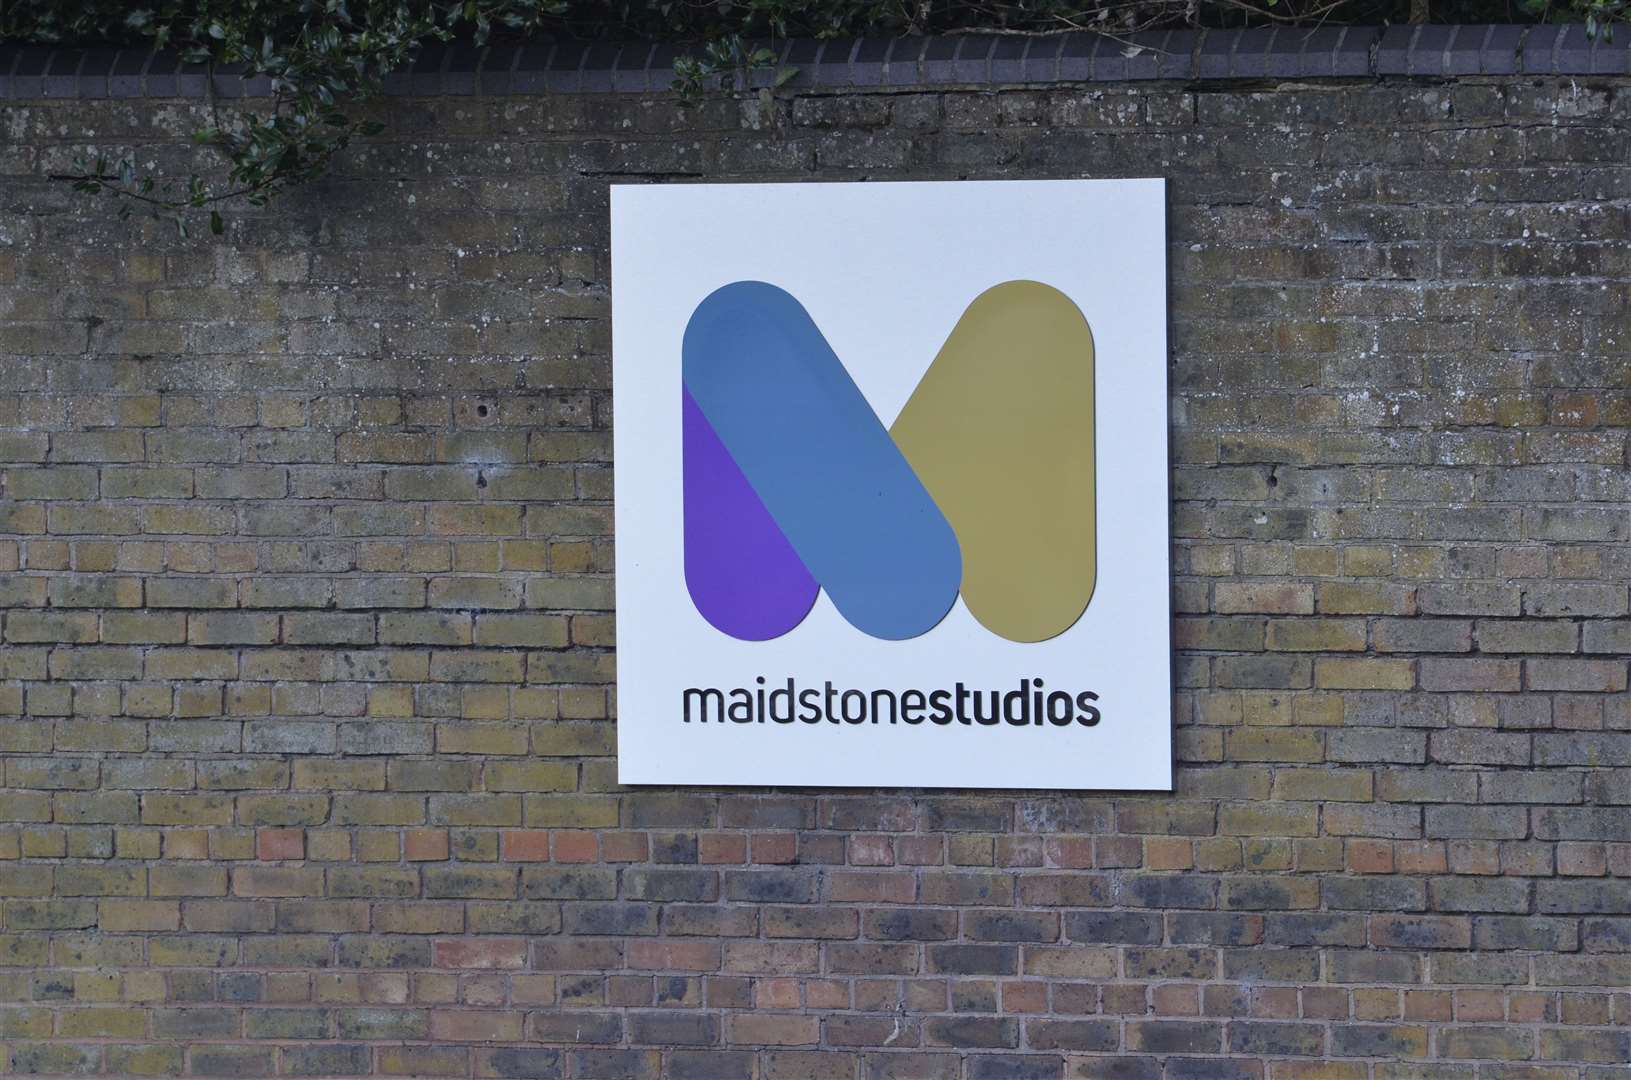 The person had been working at Maidstone Studios